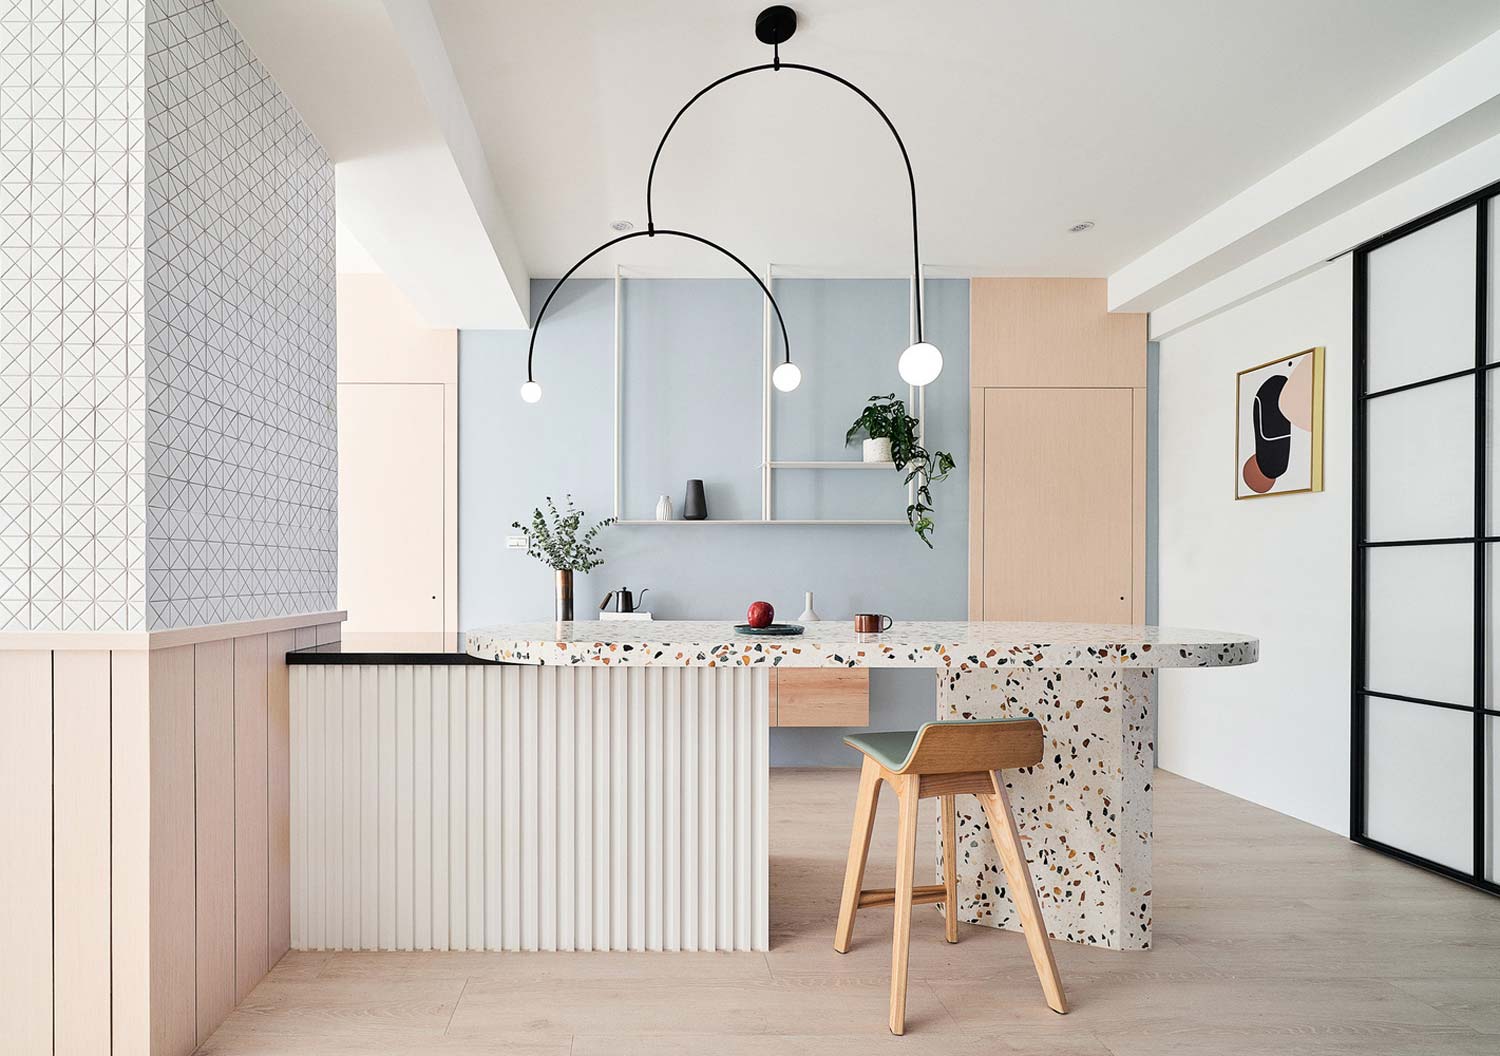 Pastel Colors And Venetian Terrazzo In A House By Nest Space Design 01 